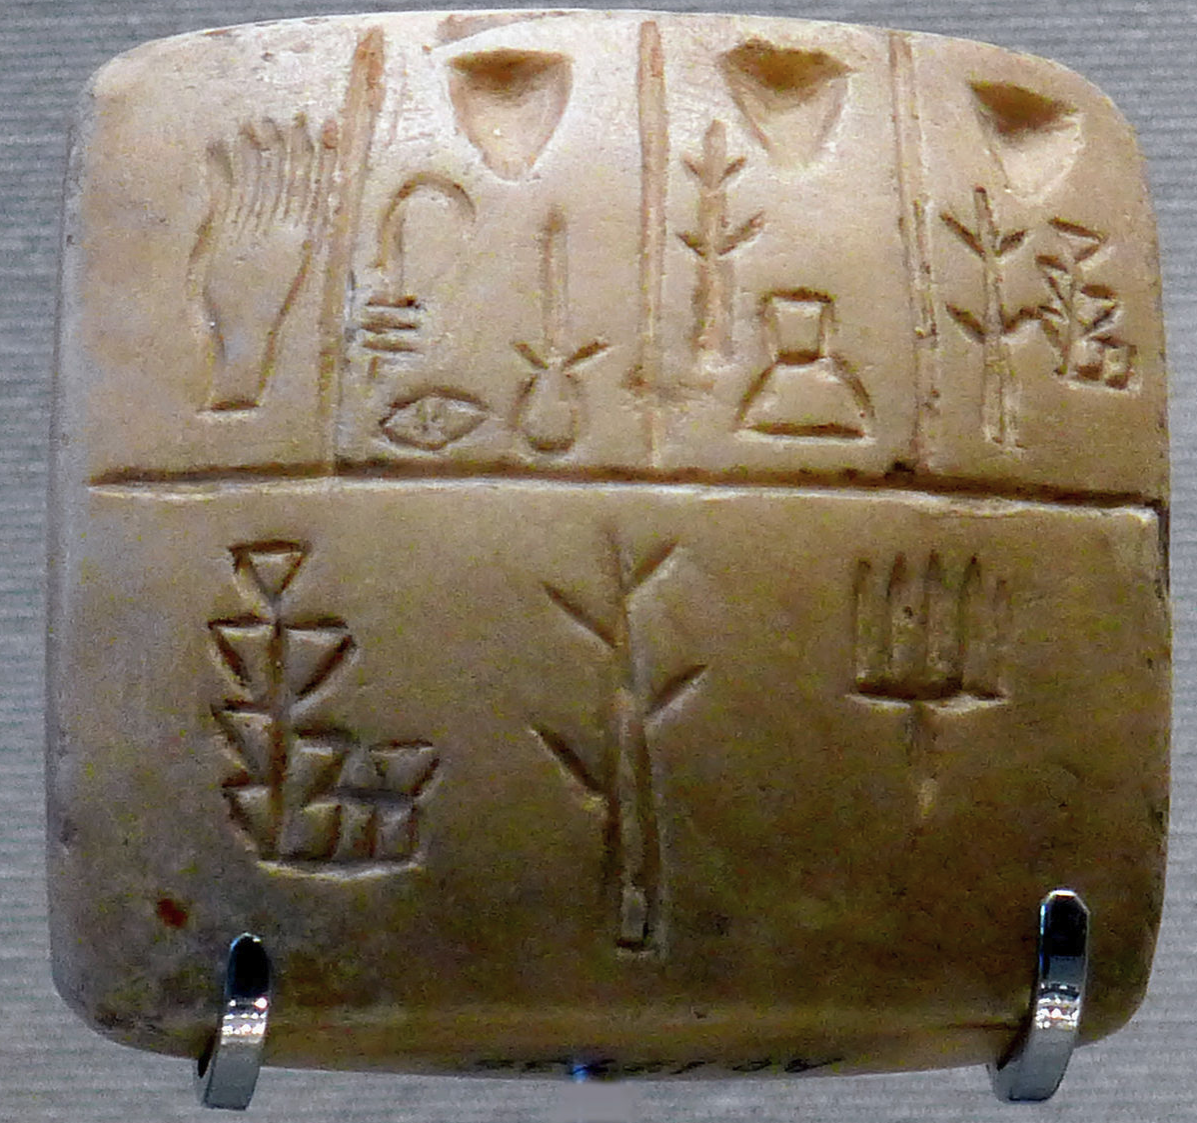 Tablet with proto-cuneiform pictographic characters (end of 4th millennium BC), Uruk III. This is thought to be a list of slaves names, the hand in the upper left corner representing the owner.[25]